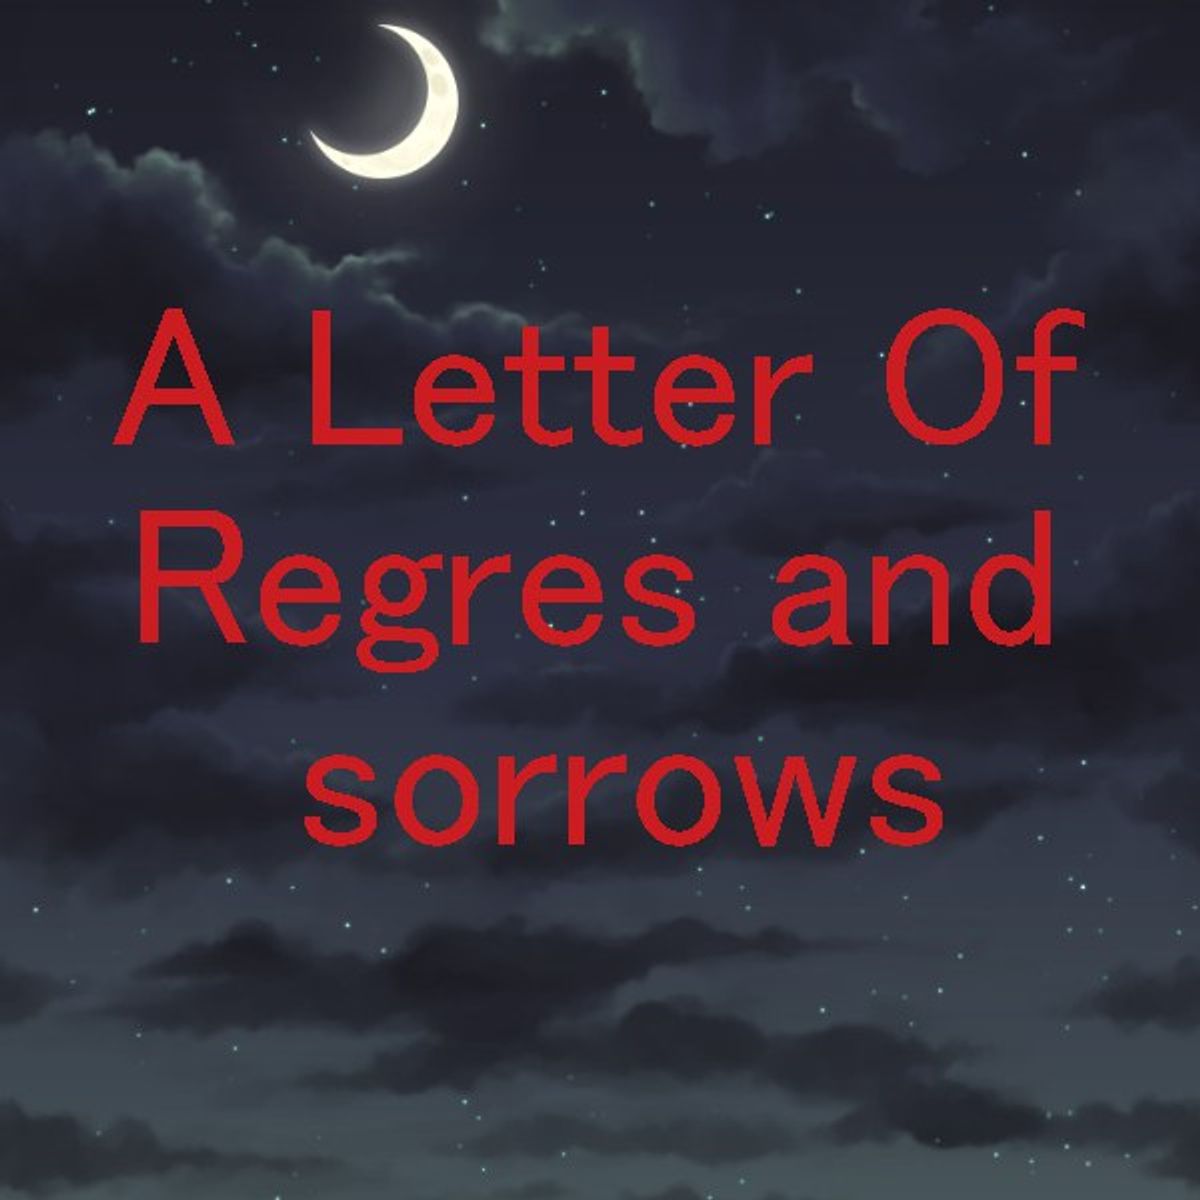 A Letter Of Regrets And Sorrows